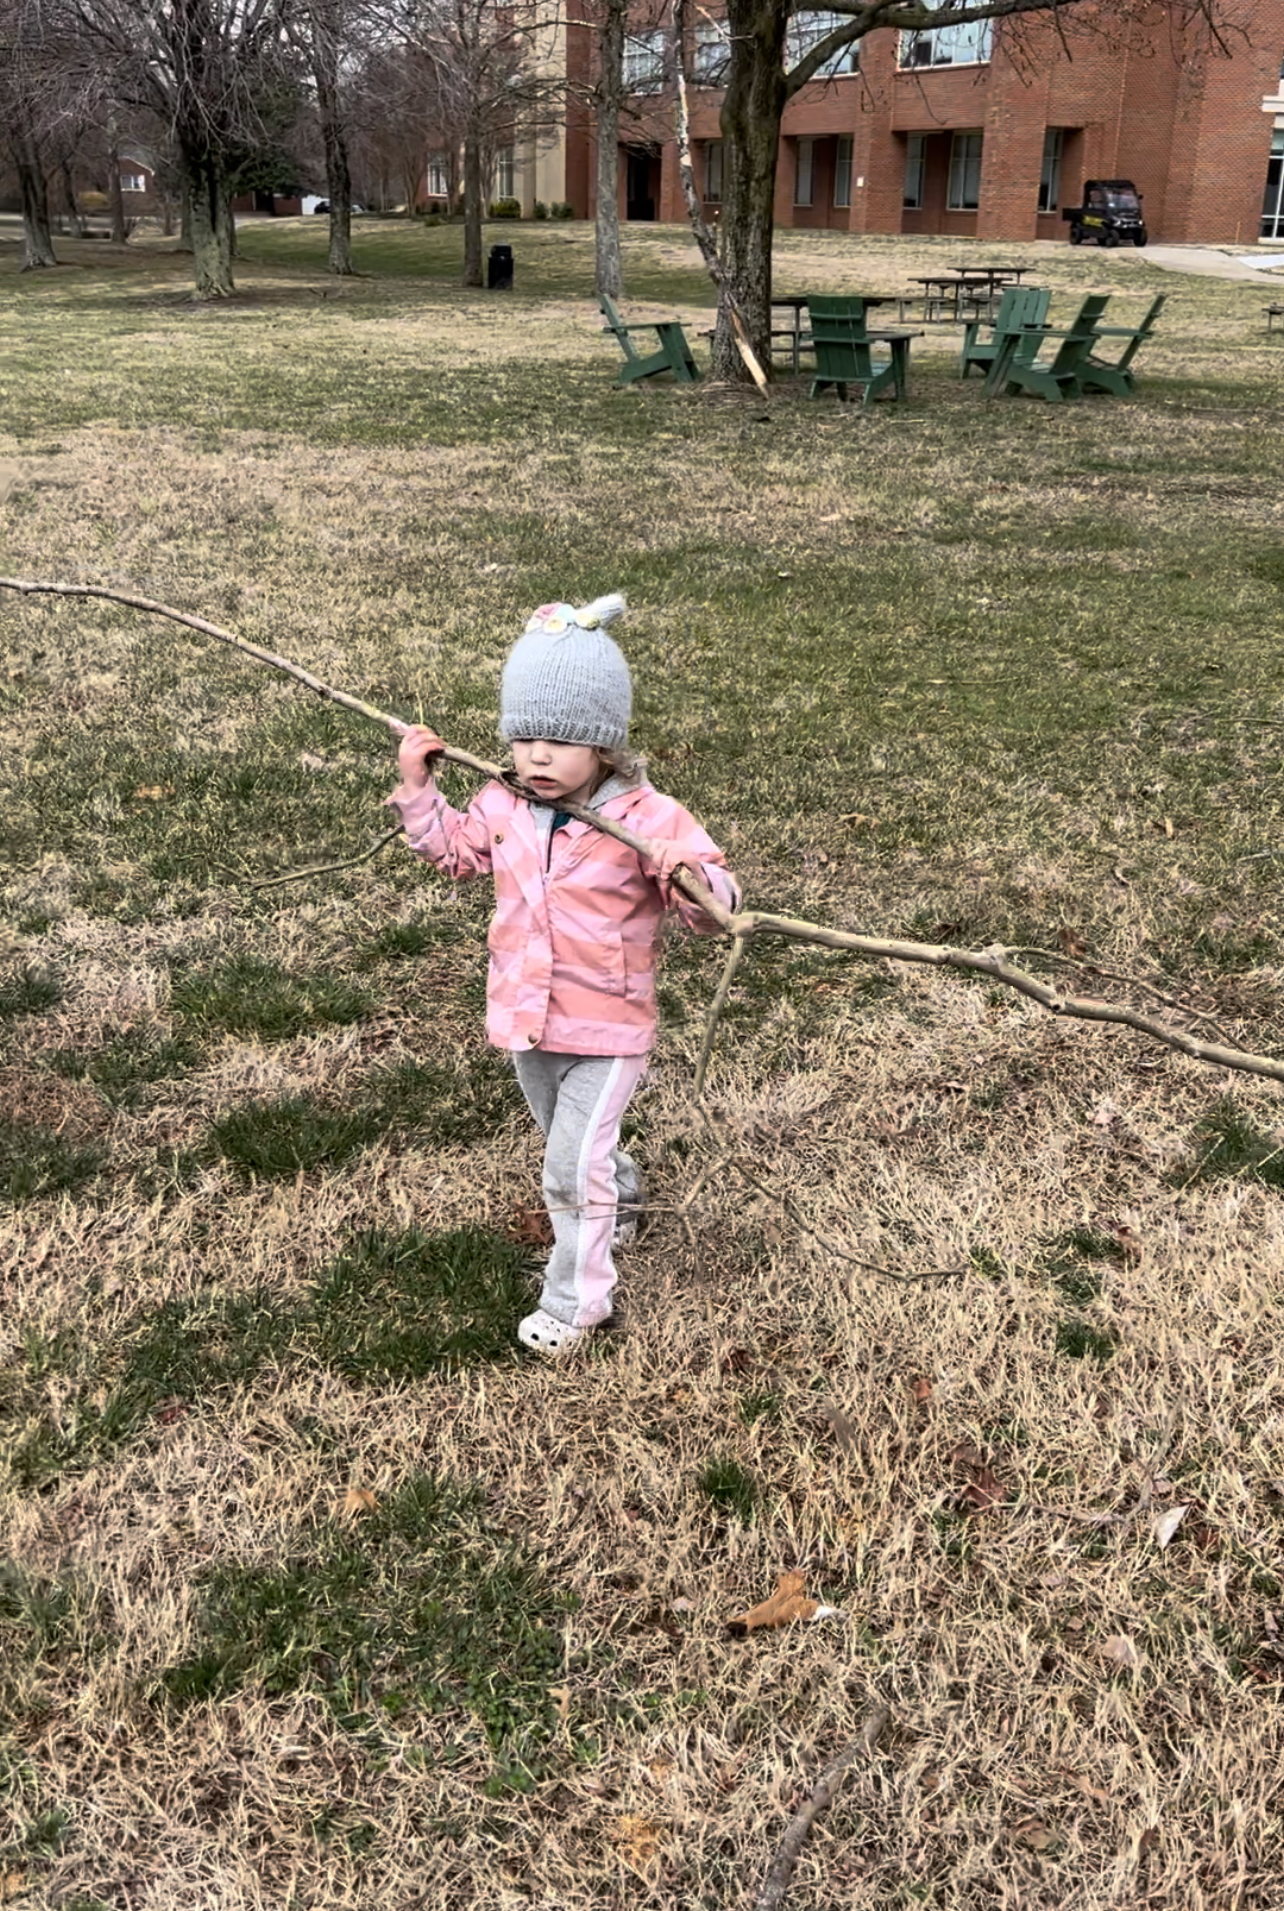 Toddler picking up sticks on the ground after a storm.